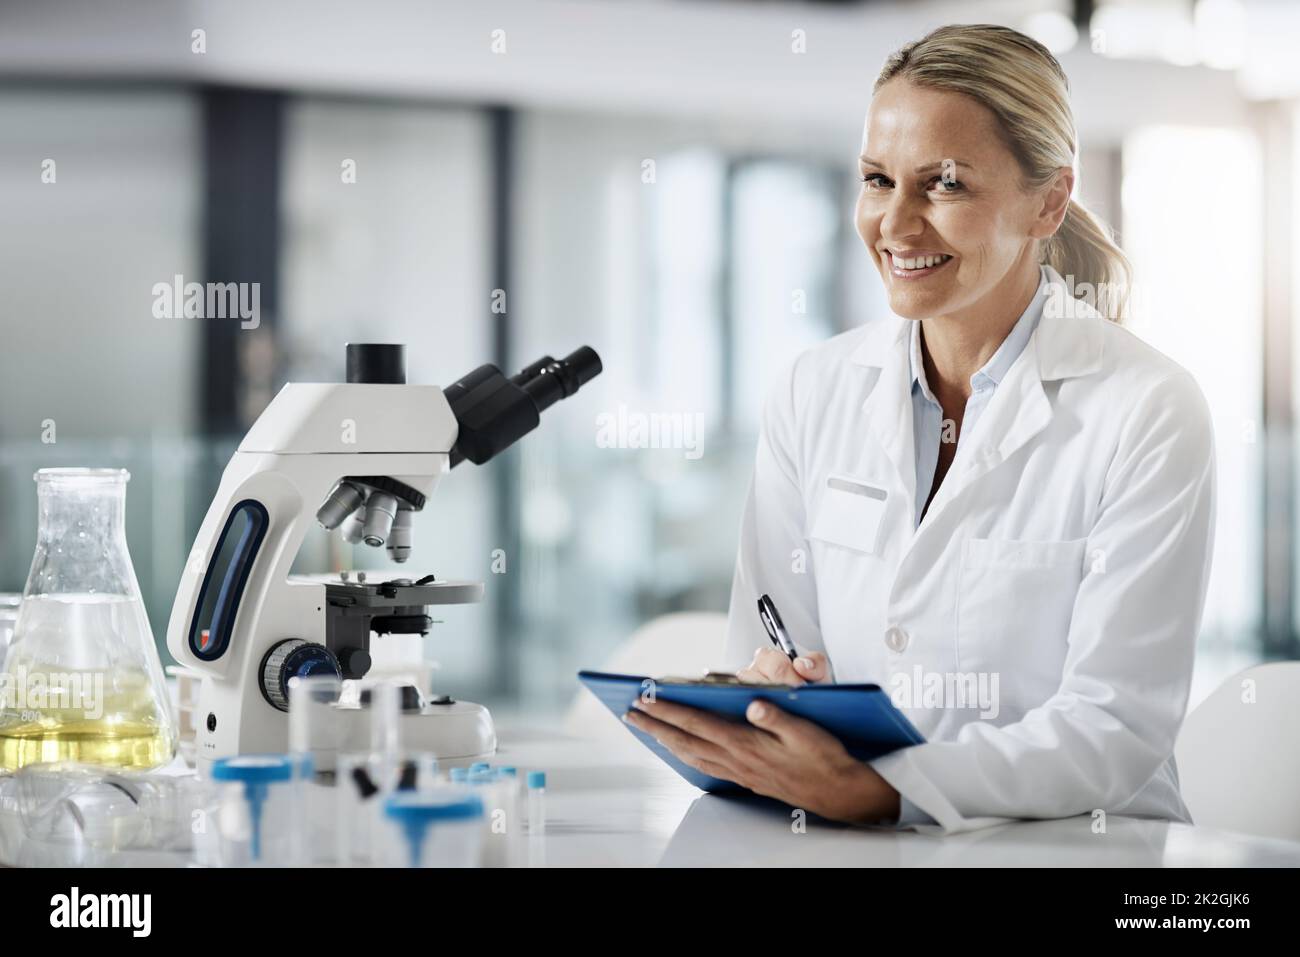 Ive got something. Cropped portrait of an attractive mature female scientist taking down notes while doing research in her lab. Stock Photo